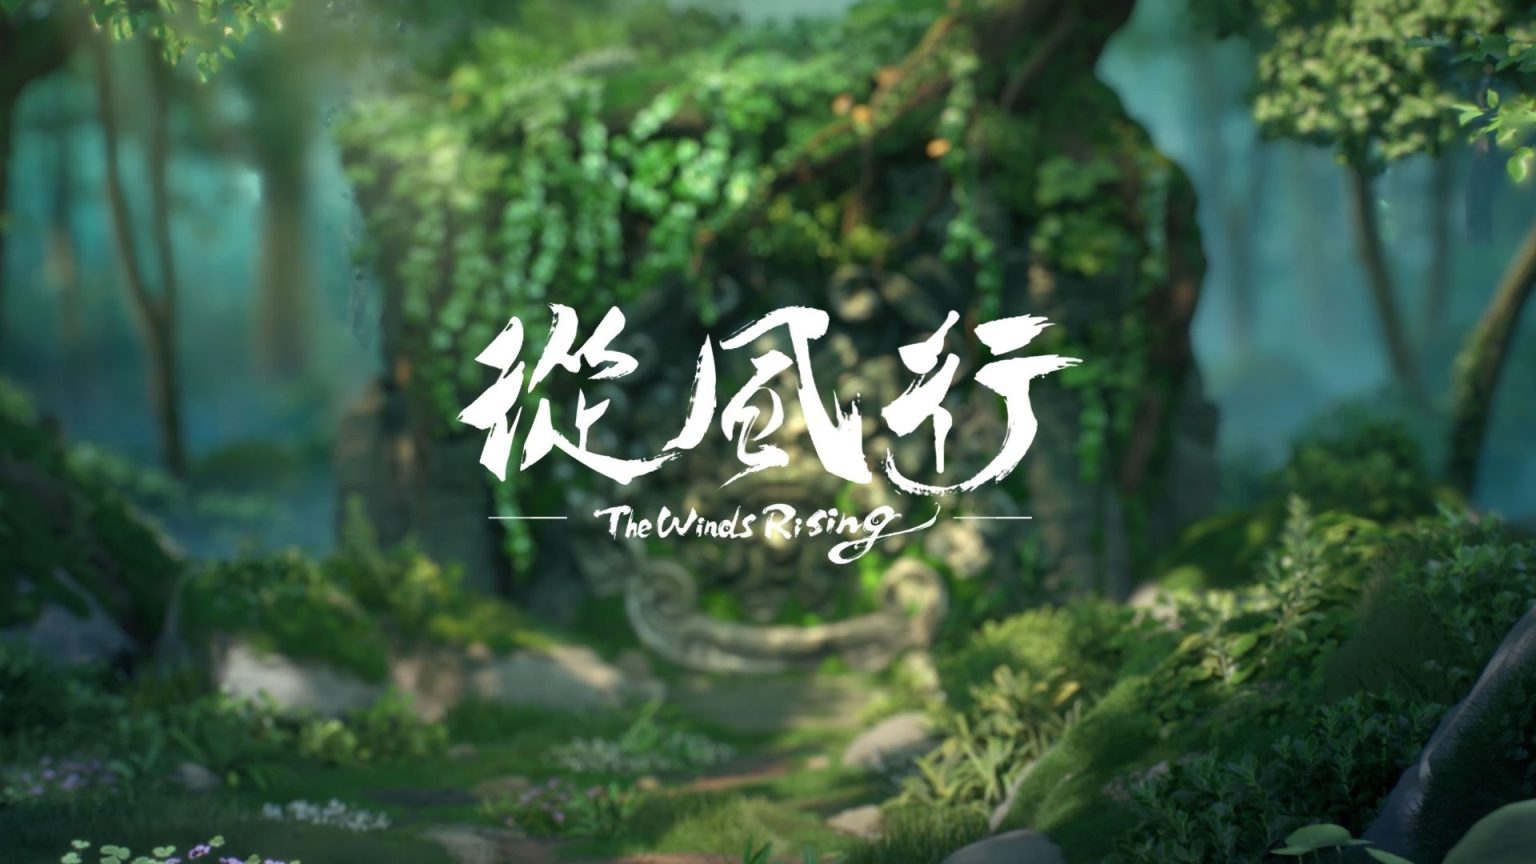 Another PlayStation 5 exclusive, The Winds Rising, was announced as part of Sony PlayStation China Hero